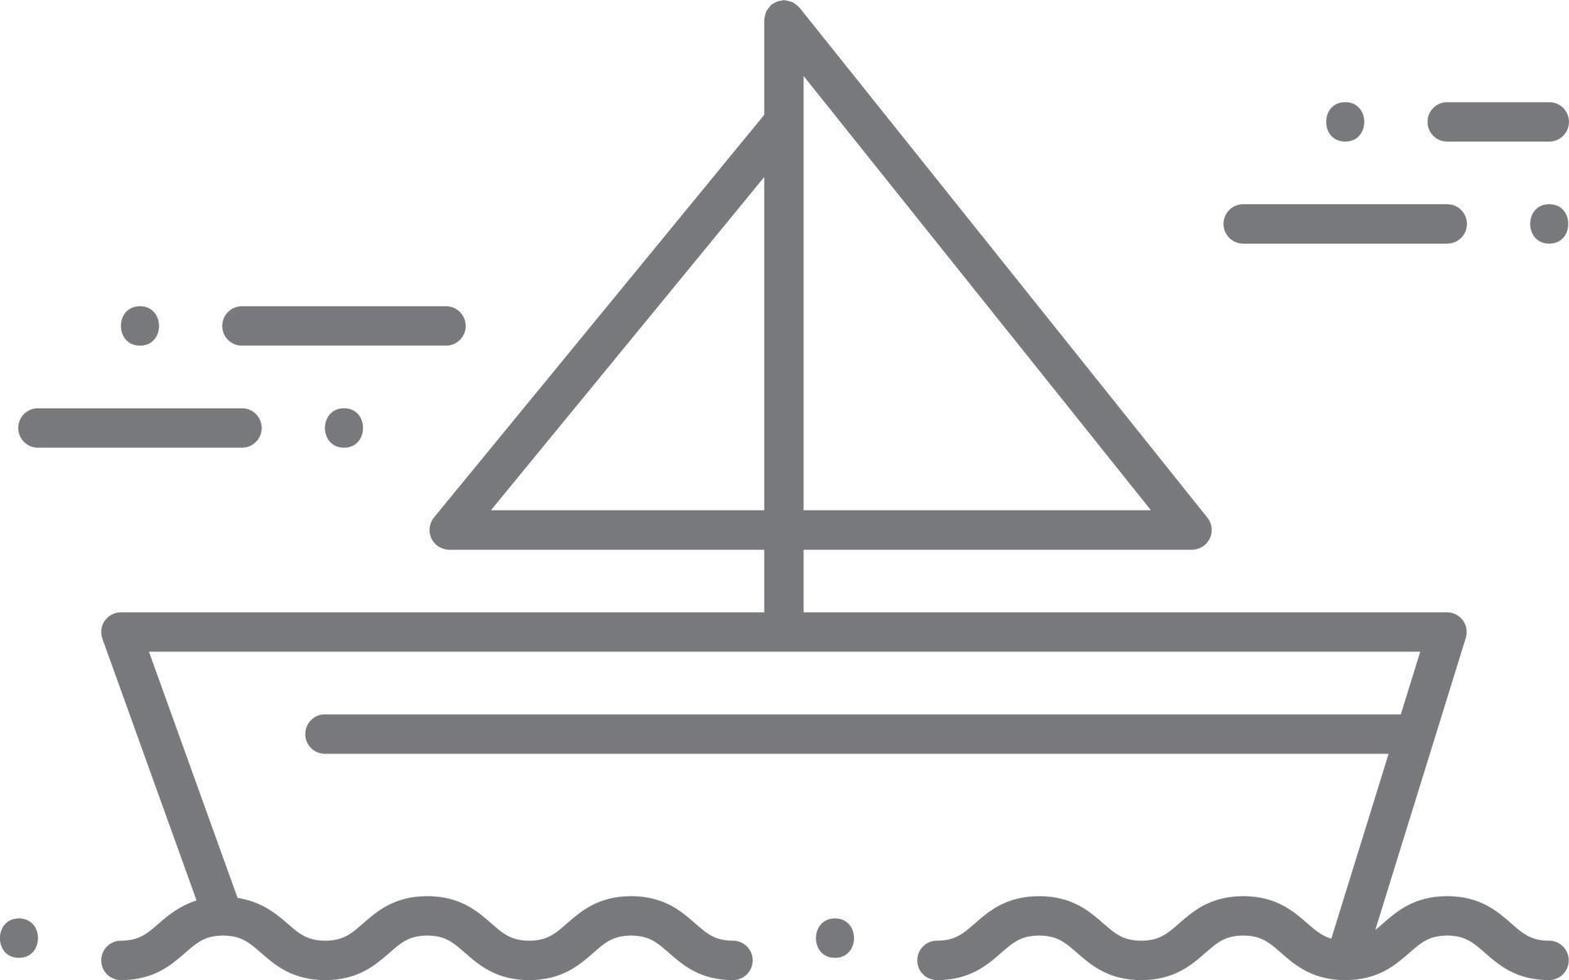 Sailboat Transportation icon people icons with black outline style. Vehicle, symbol, transport, line, outline, travel, automobile, editable, pictogram, isolated, flat. Vector illustration